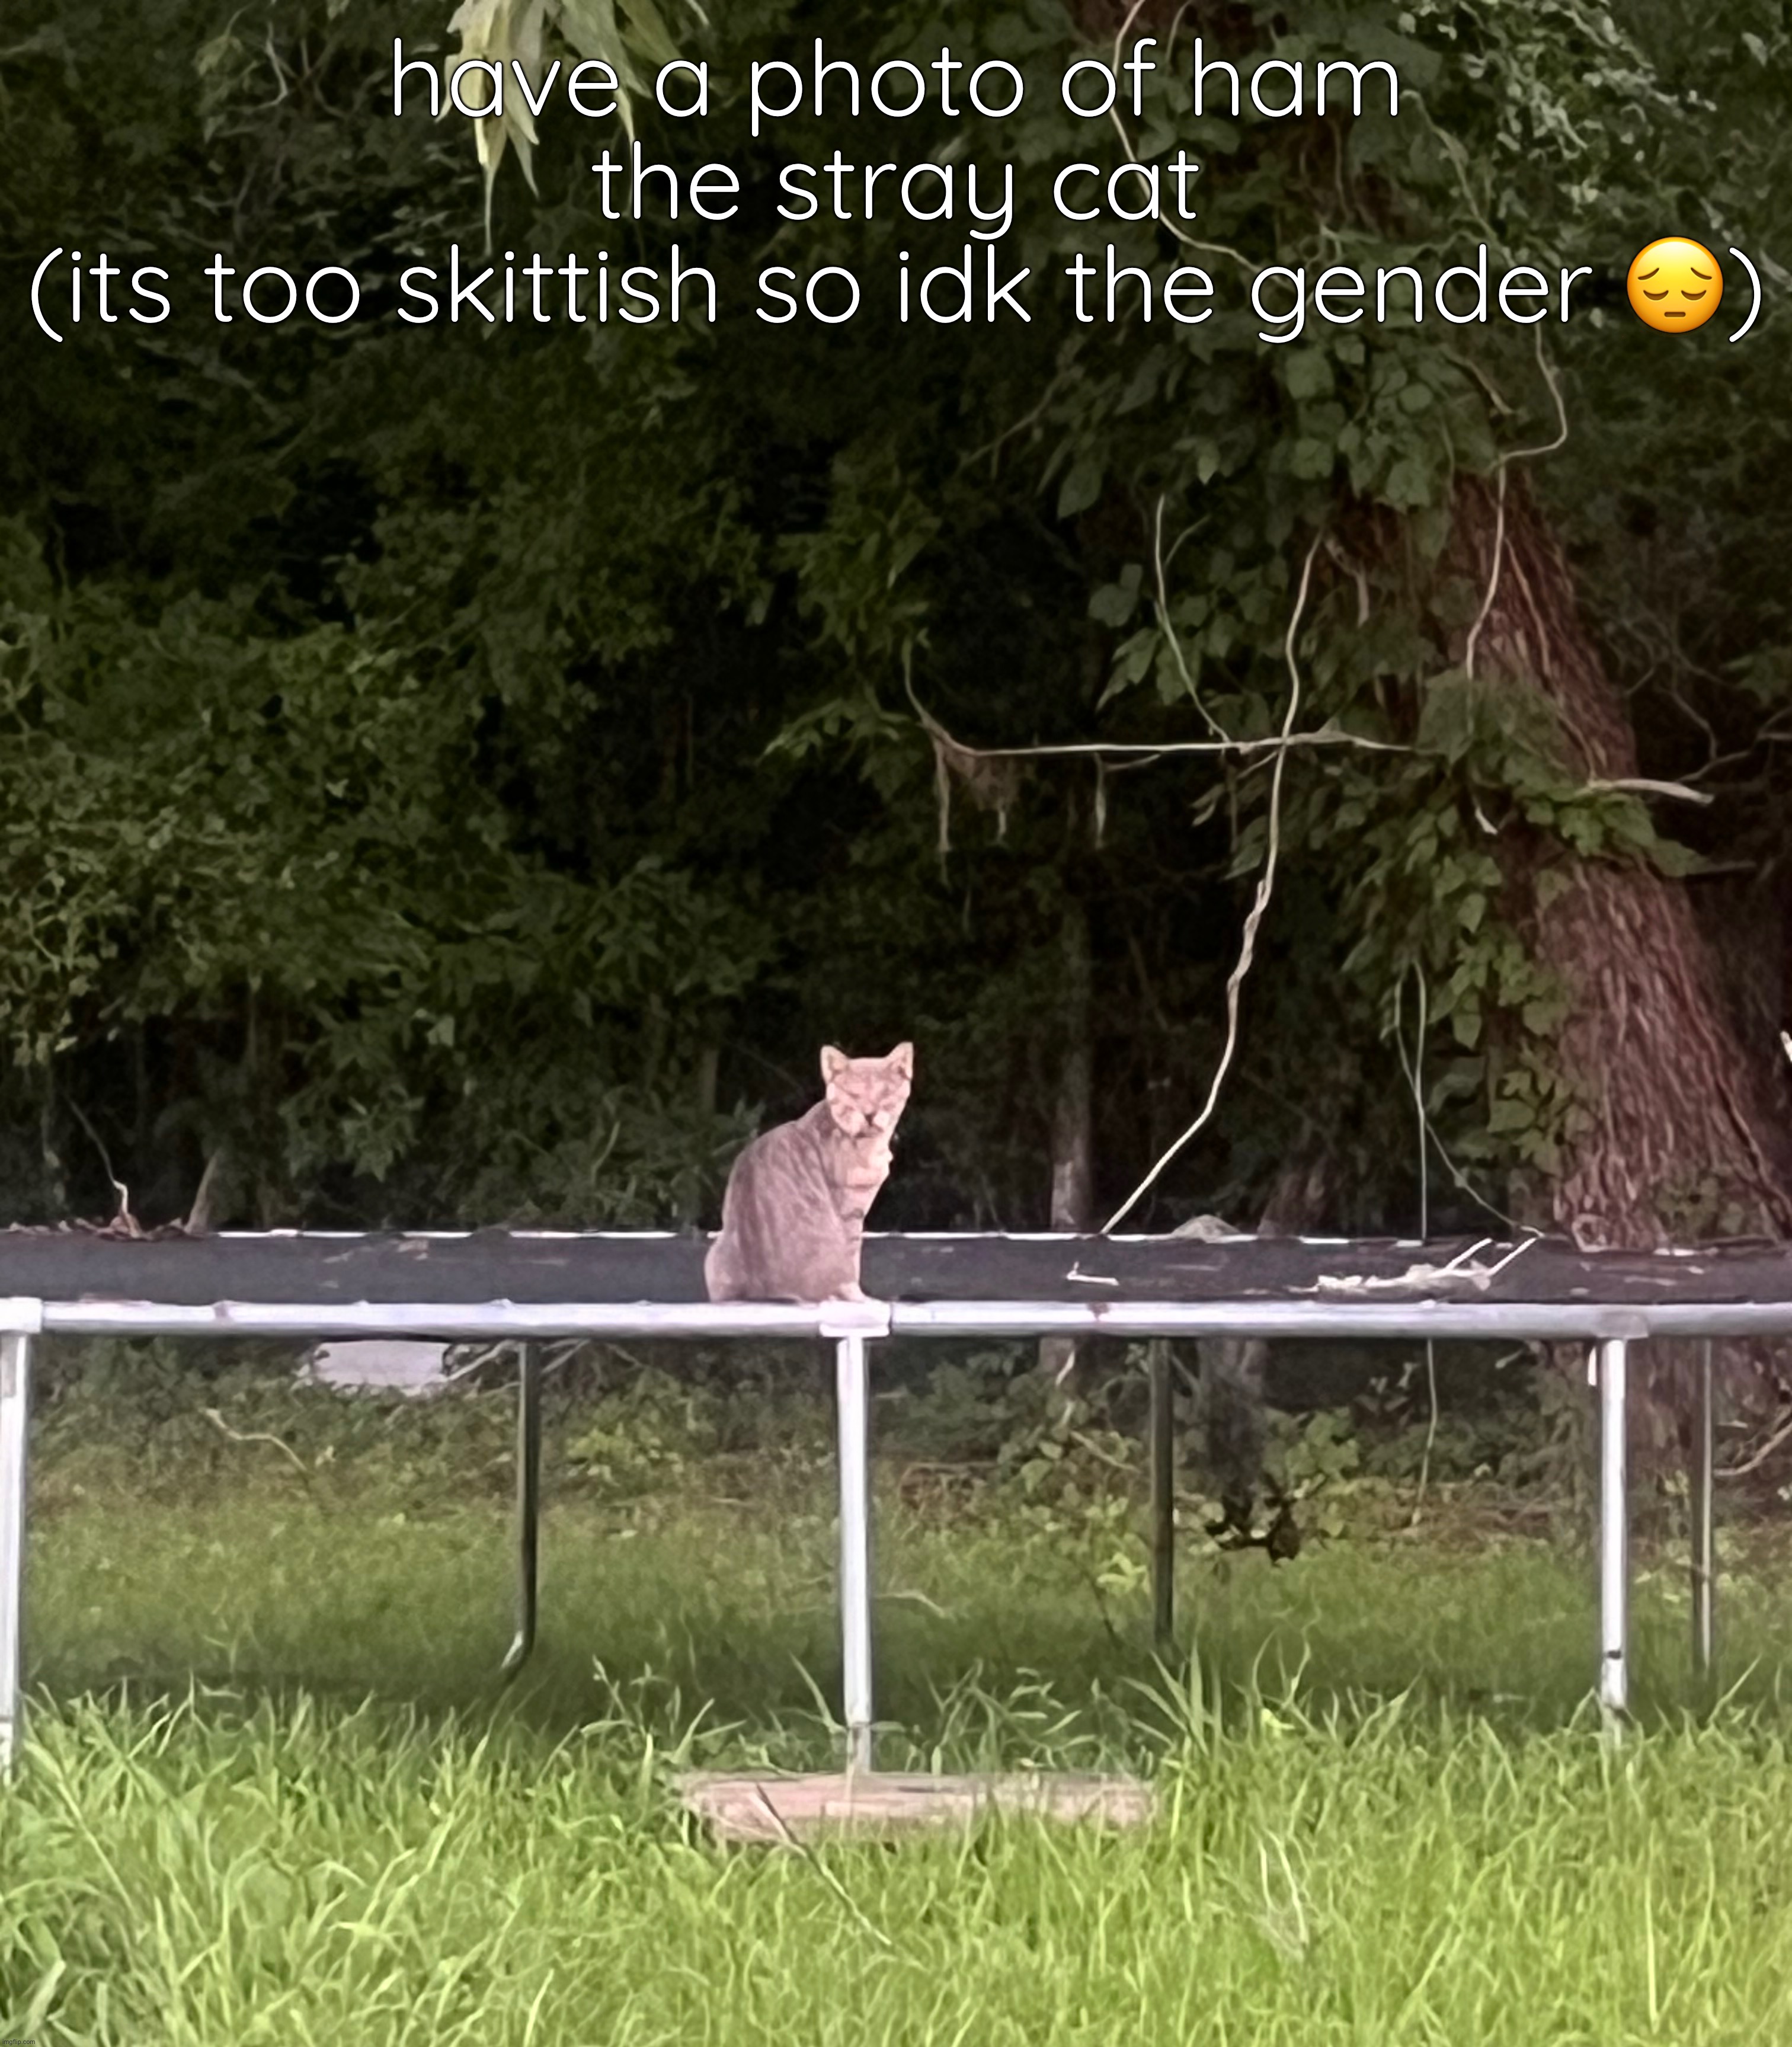 also why i couldn’t move close enough to get a clear photo so this is at 5x zoom | have a photo of ham the stray cat
(its too skittish so idk the gender 😔) | made w/ Imgflip meme maker